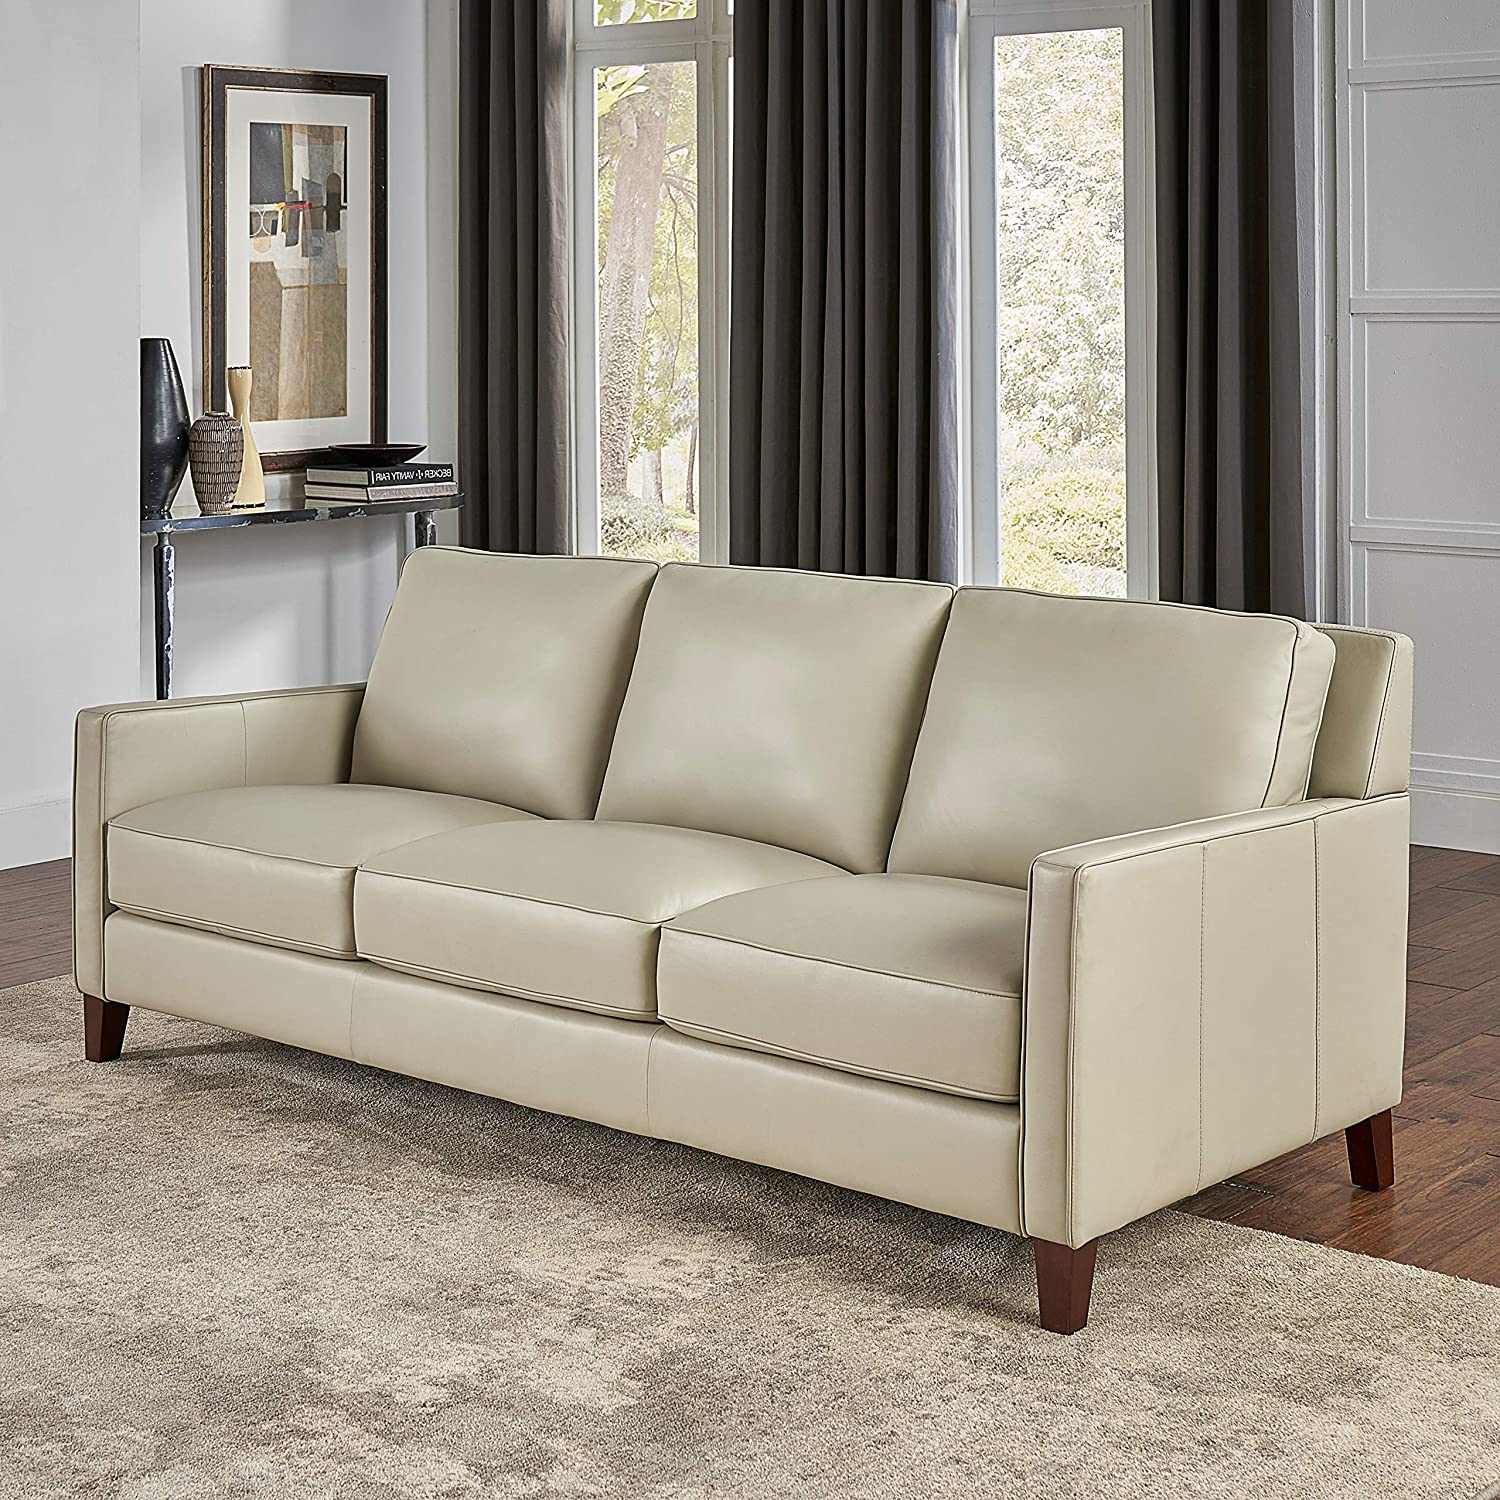 Hydeline Ashby Leather 3PC Sofa Set, Sofa, Loveseat and Chair, Ice - image 2 of 8